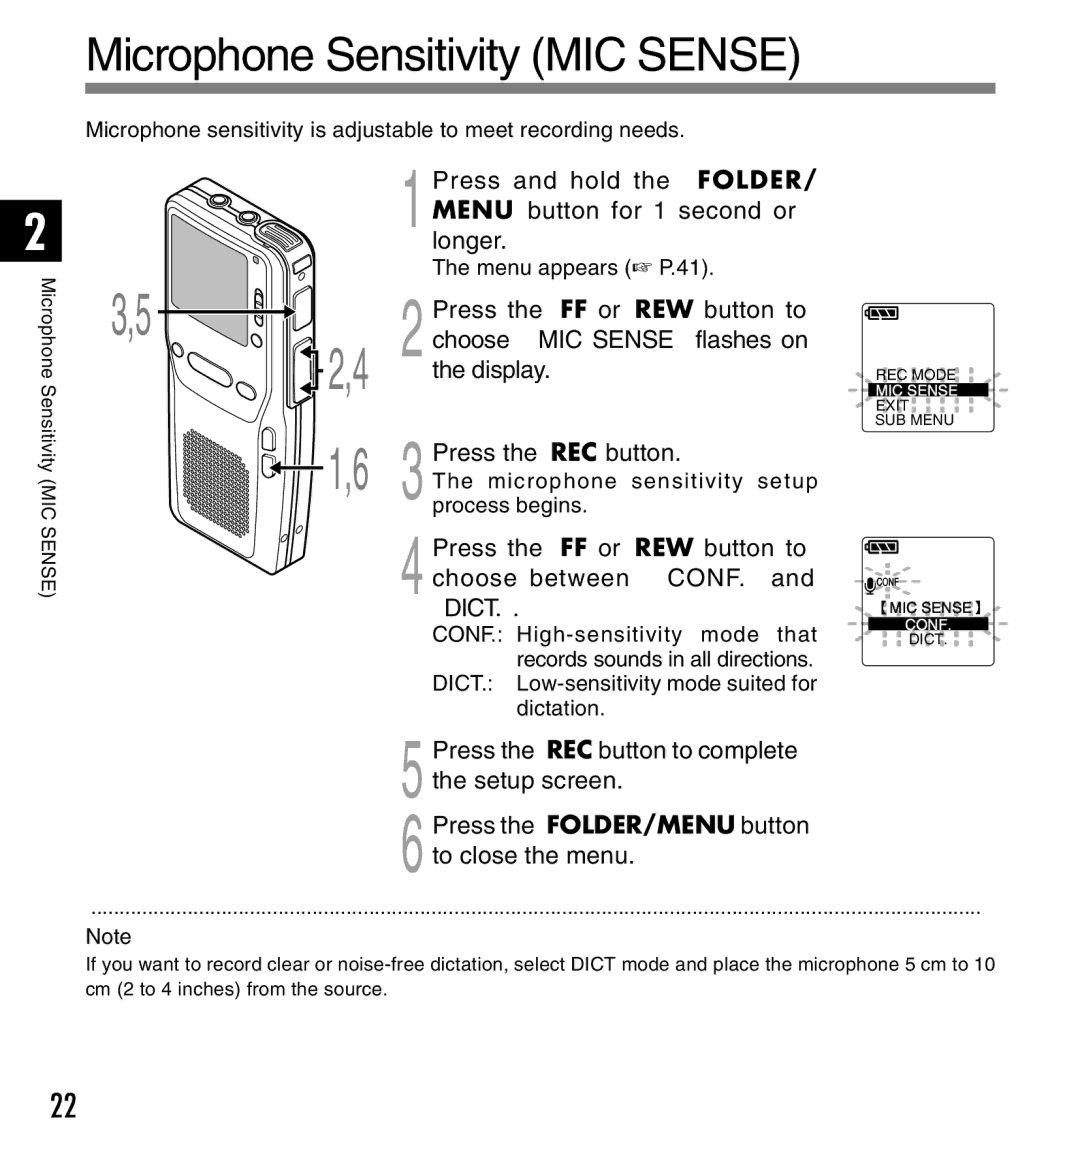 Olympus DS-2300 manual Microphone Sensitivity MIC Sense, Press the FF or REW button to choose between CONF. and Dict 